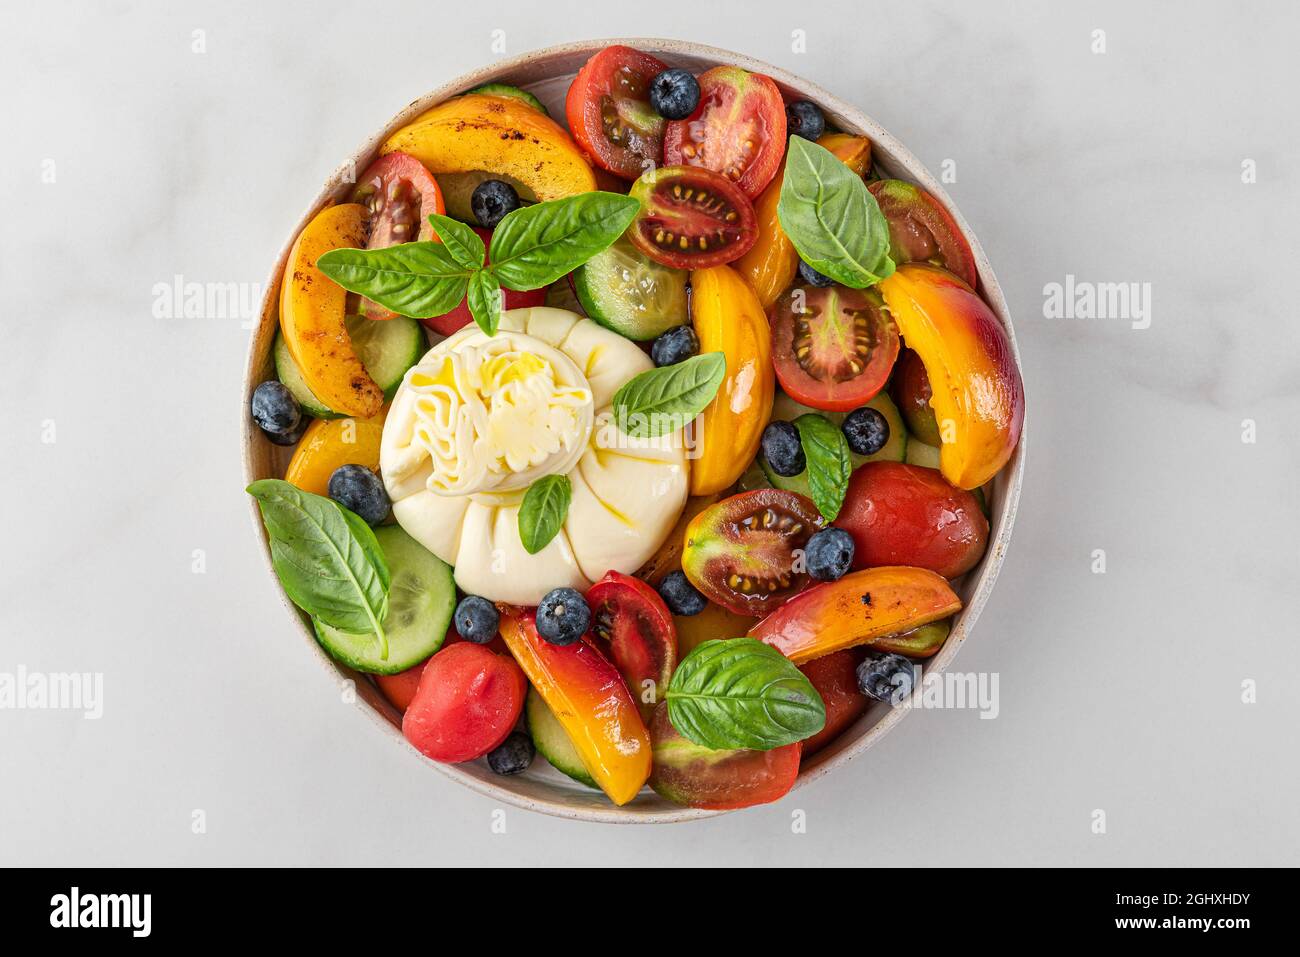 Delicious summer salad with burrata cheese, grilled peaches, tomatoes, blueberries, cucumber, olive oil and basil. Top view. Healthy diet food Stock Photo